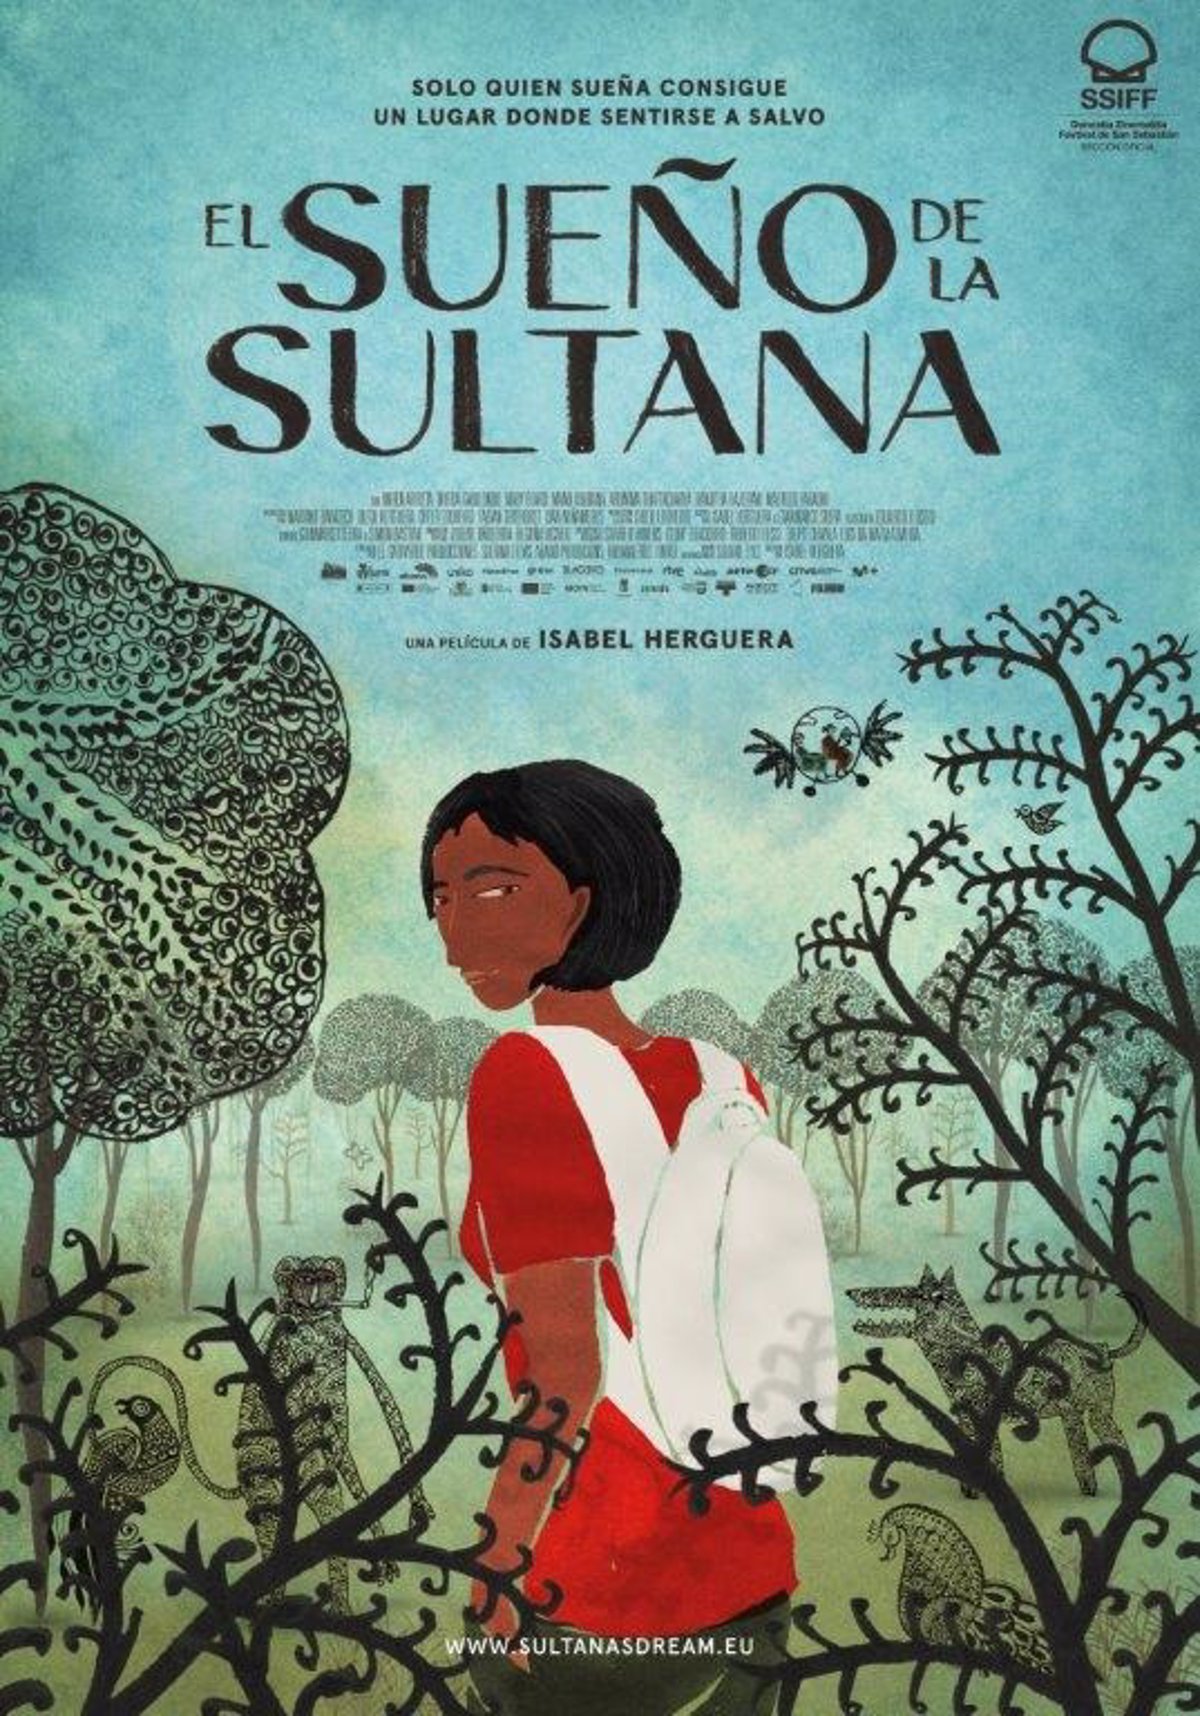 “The Sultana’s Dream” praises feminism in San Sebastián: “Everyone wanted to remove the word feminist from the film”